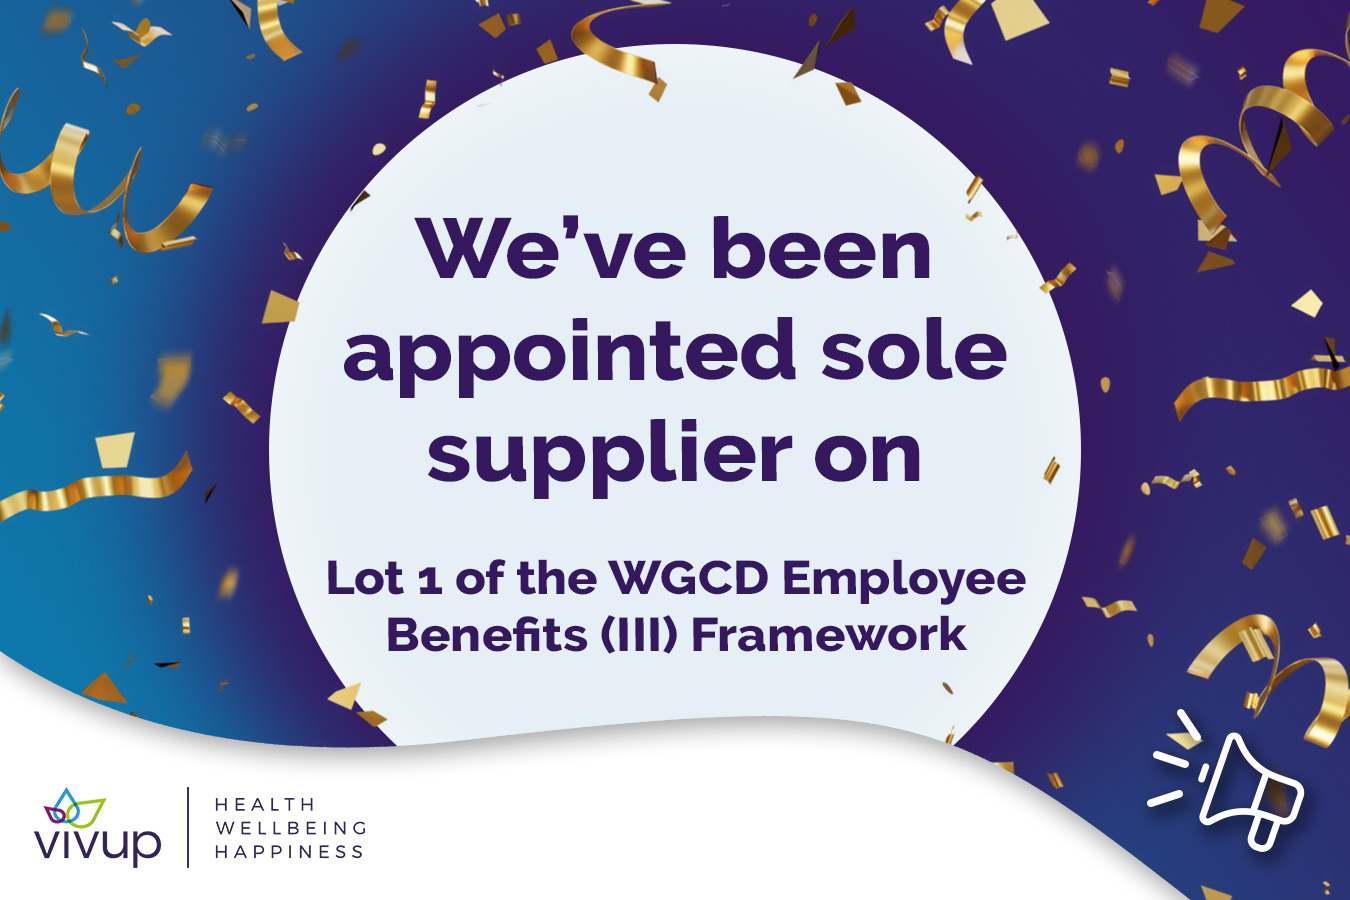 Vivup appointed sole supplier on lot 1 of the WGCD Employee Benefits (III) Framework